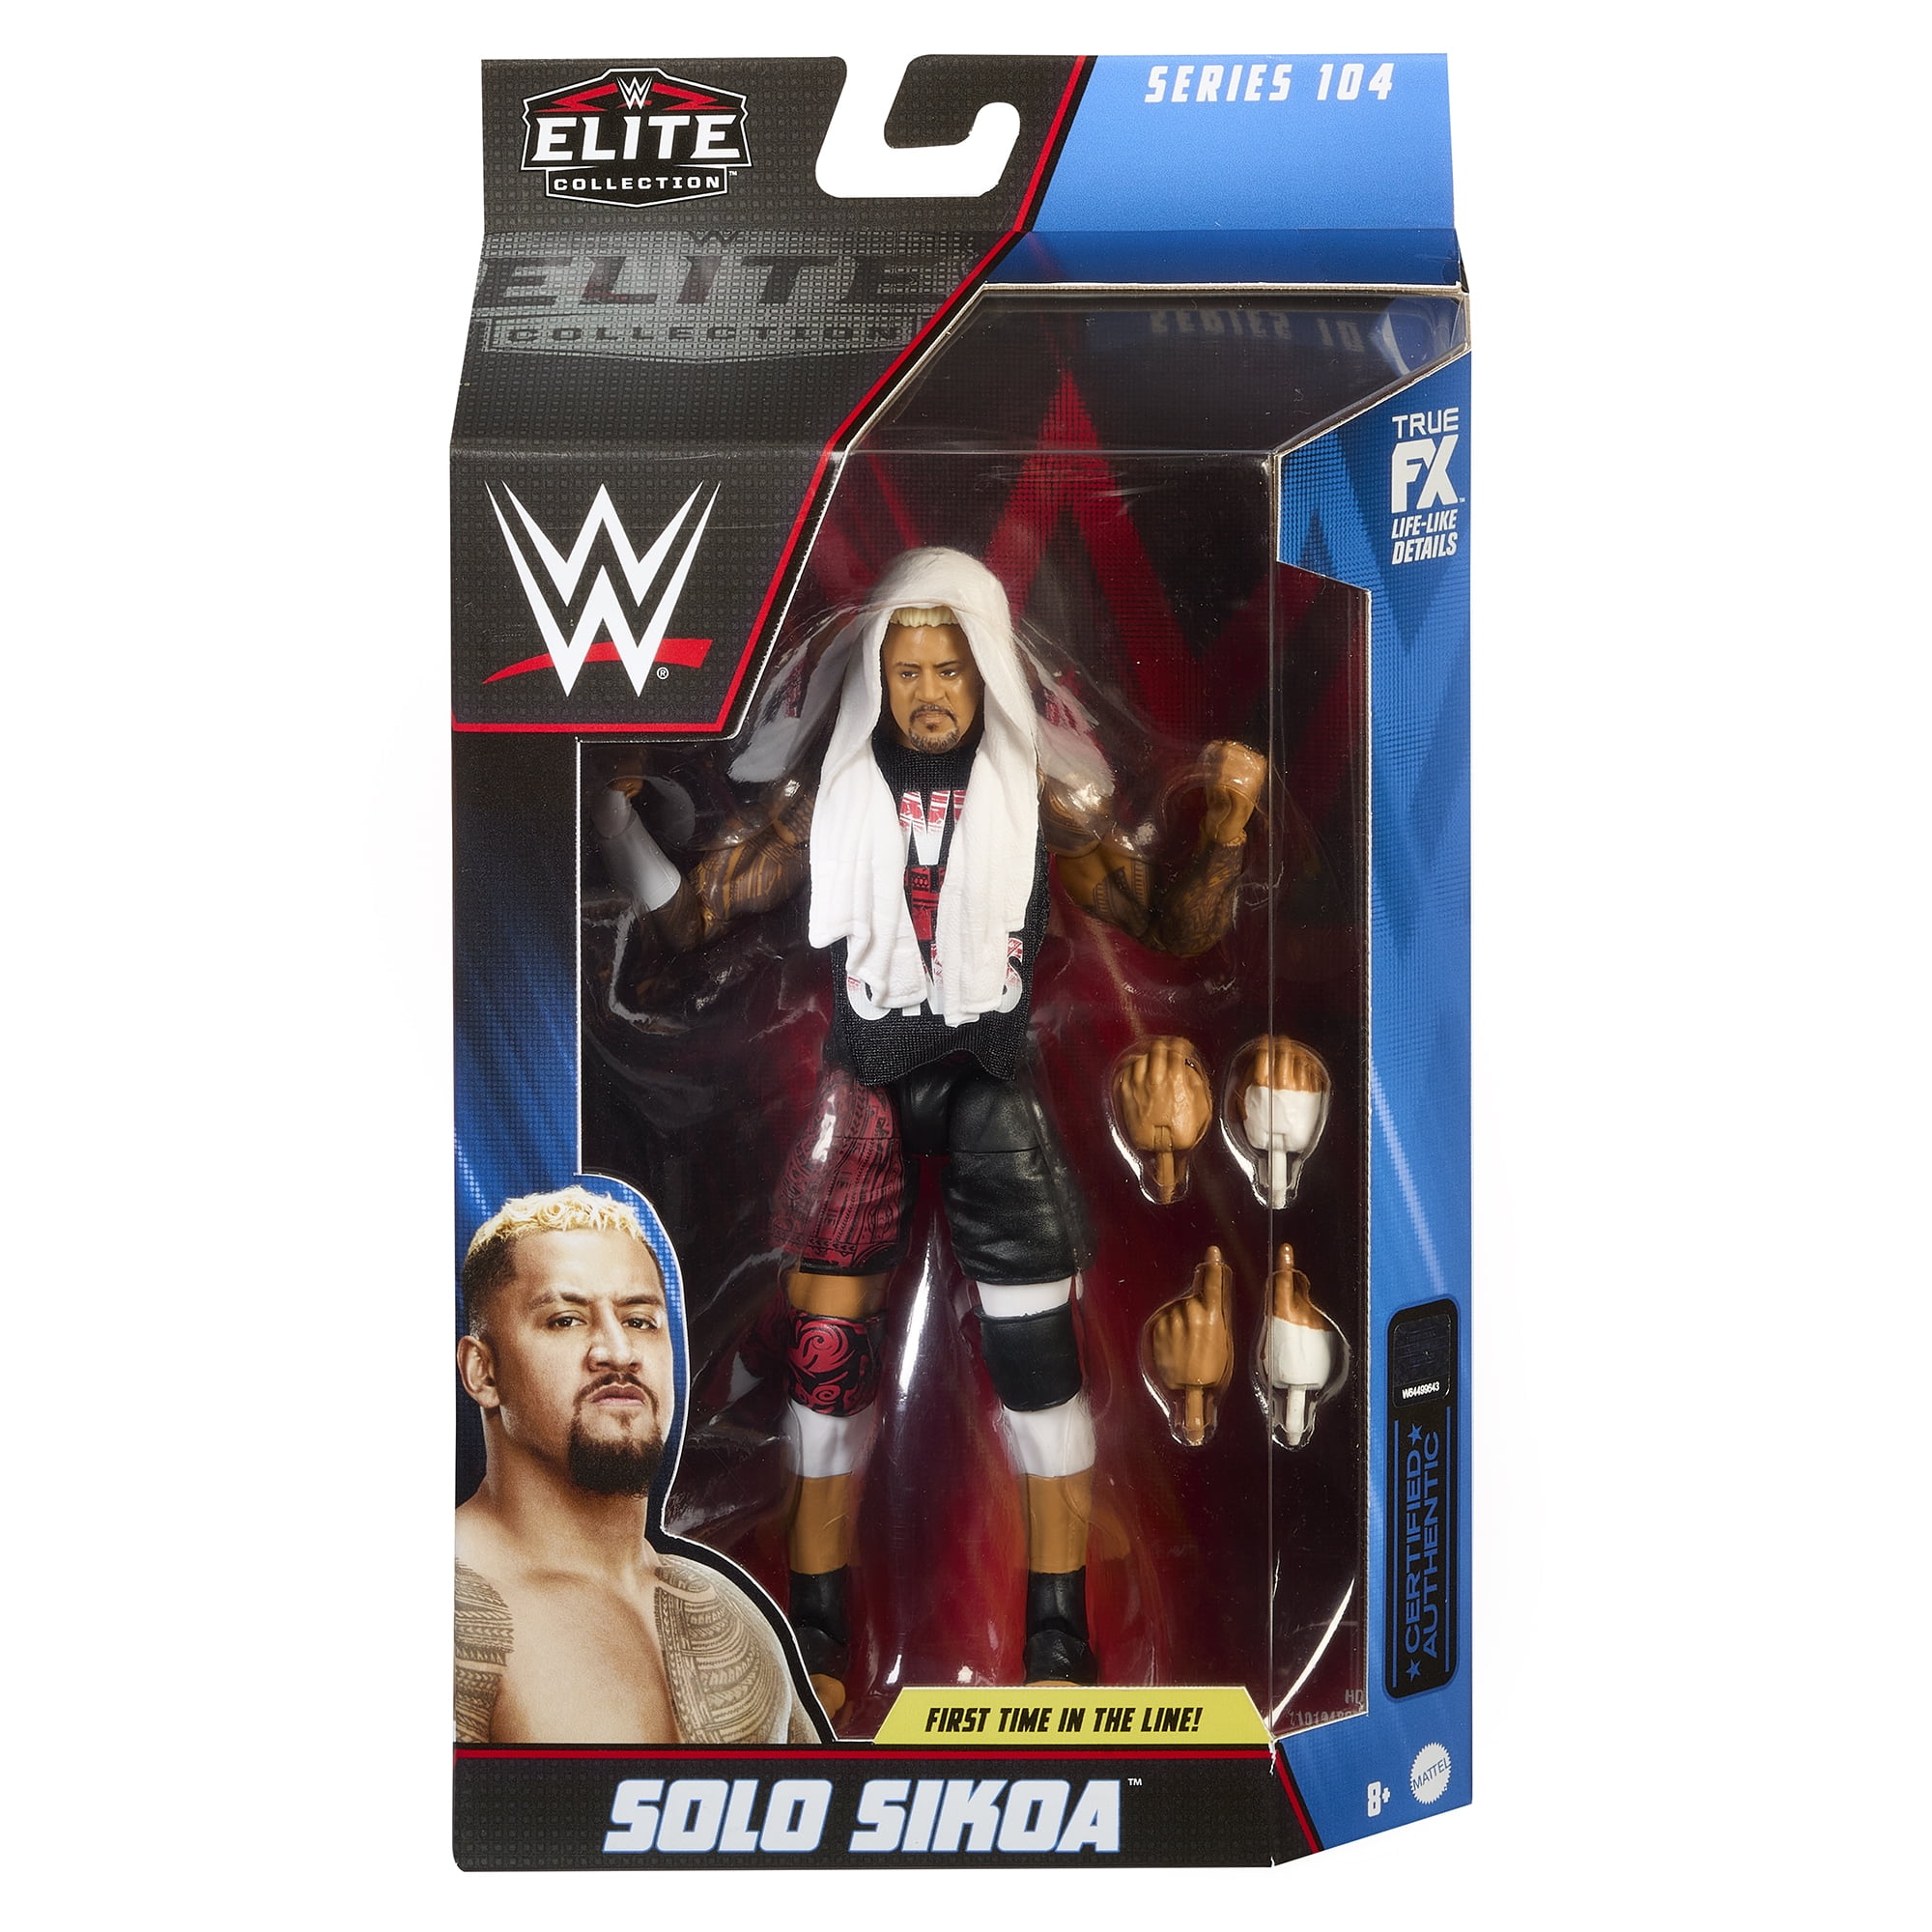 WWE Wrestling Elite Collection Series 104 Solo Sikoa Action Figure